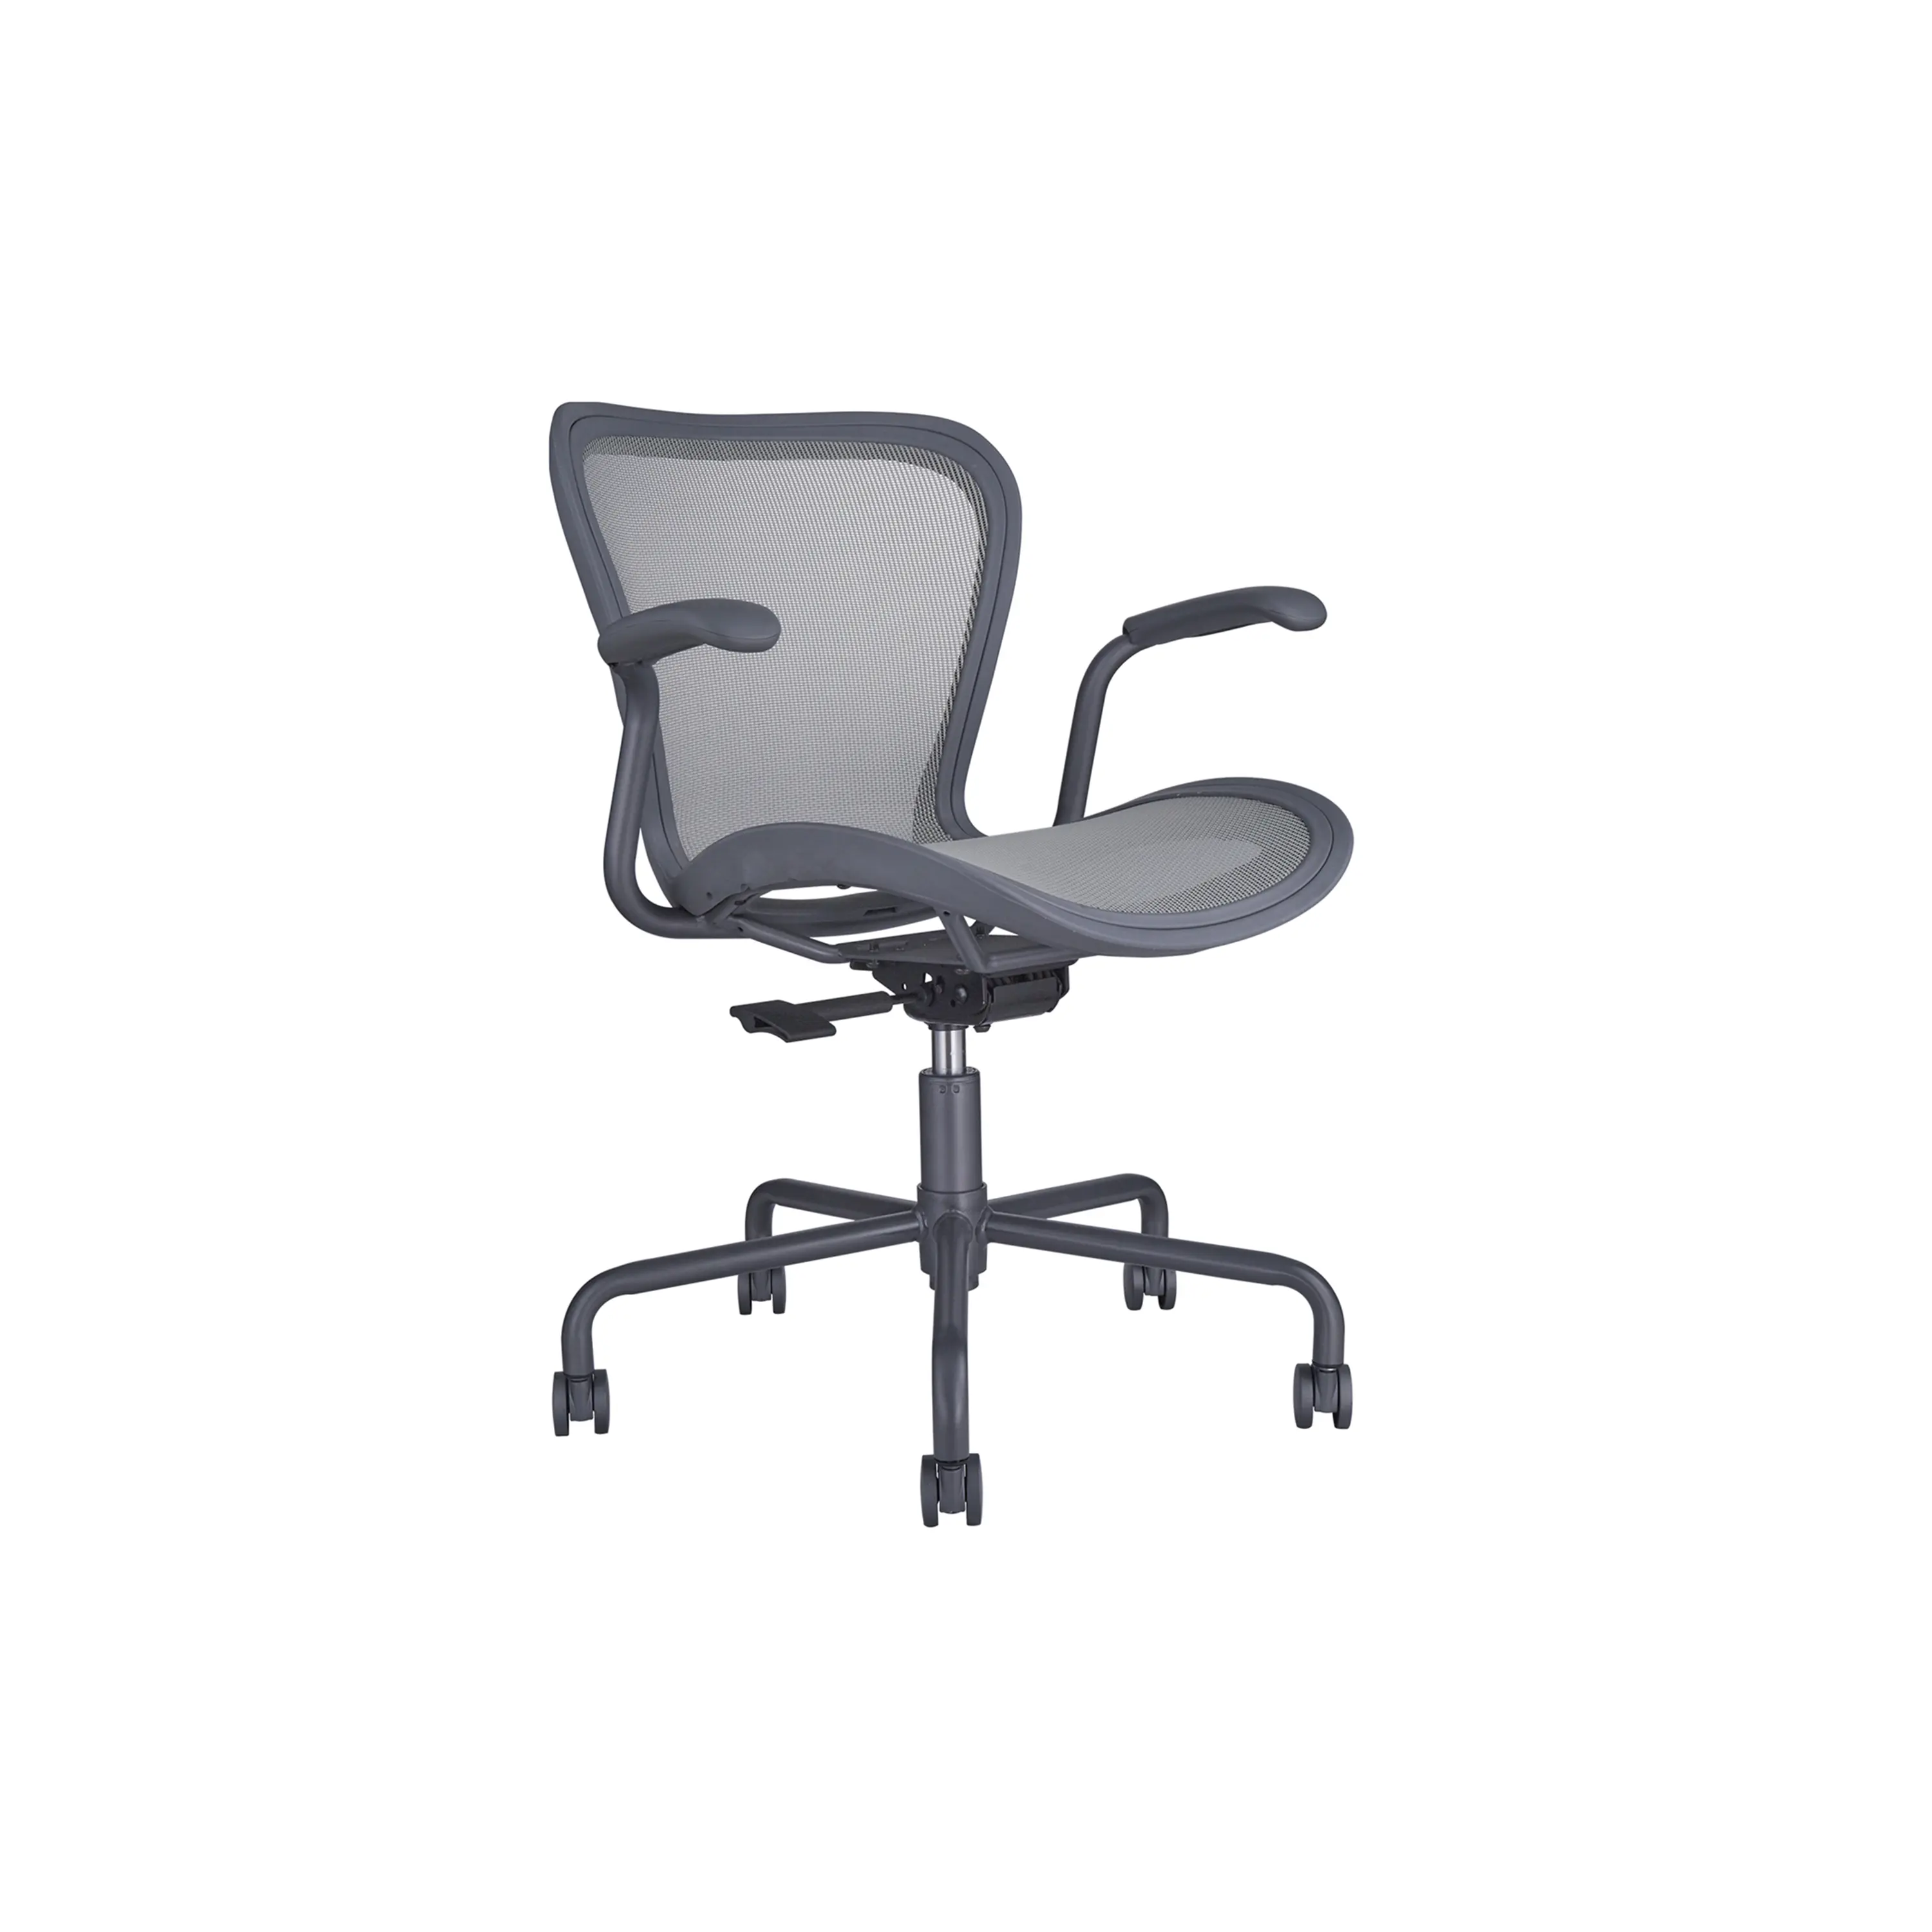 Eagleseating High quality black Swivel breathable Seat Height Adjustable full mesh office Chair